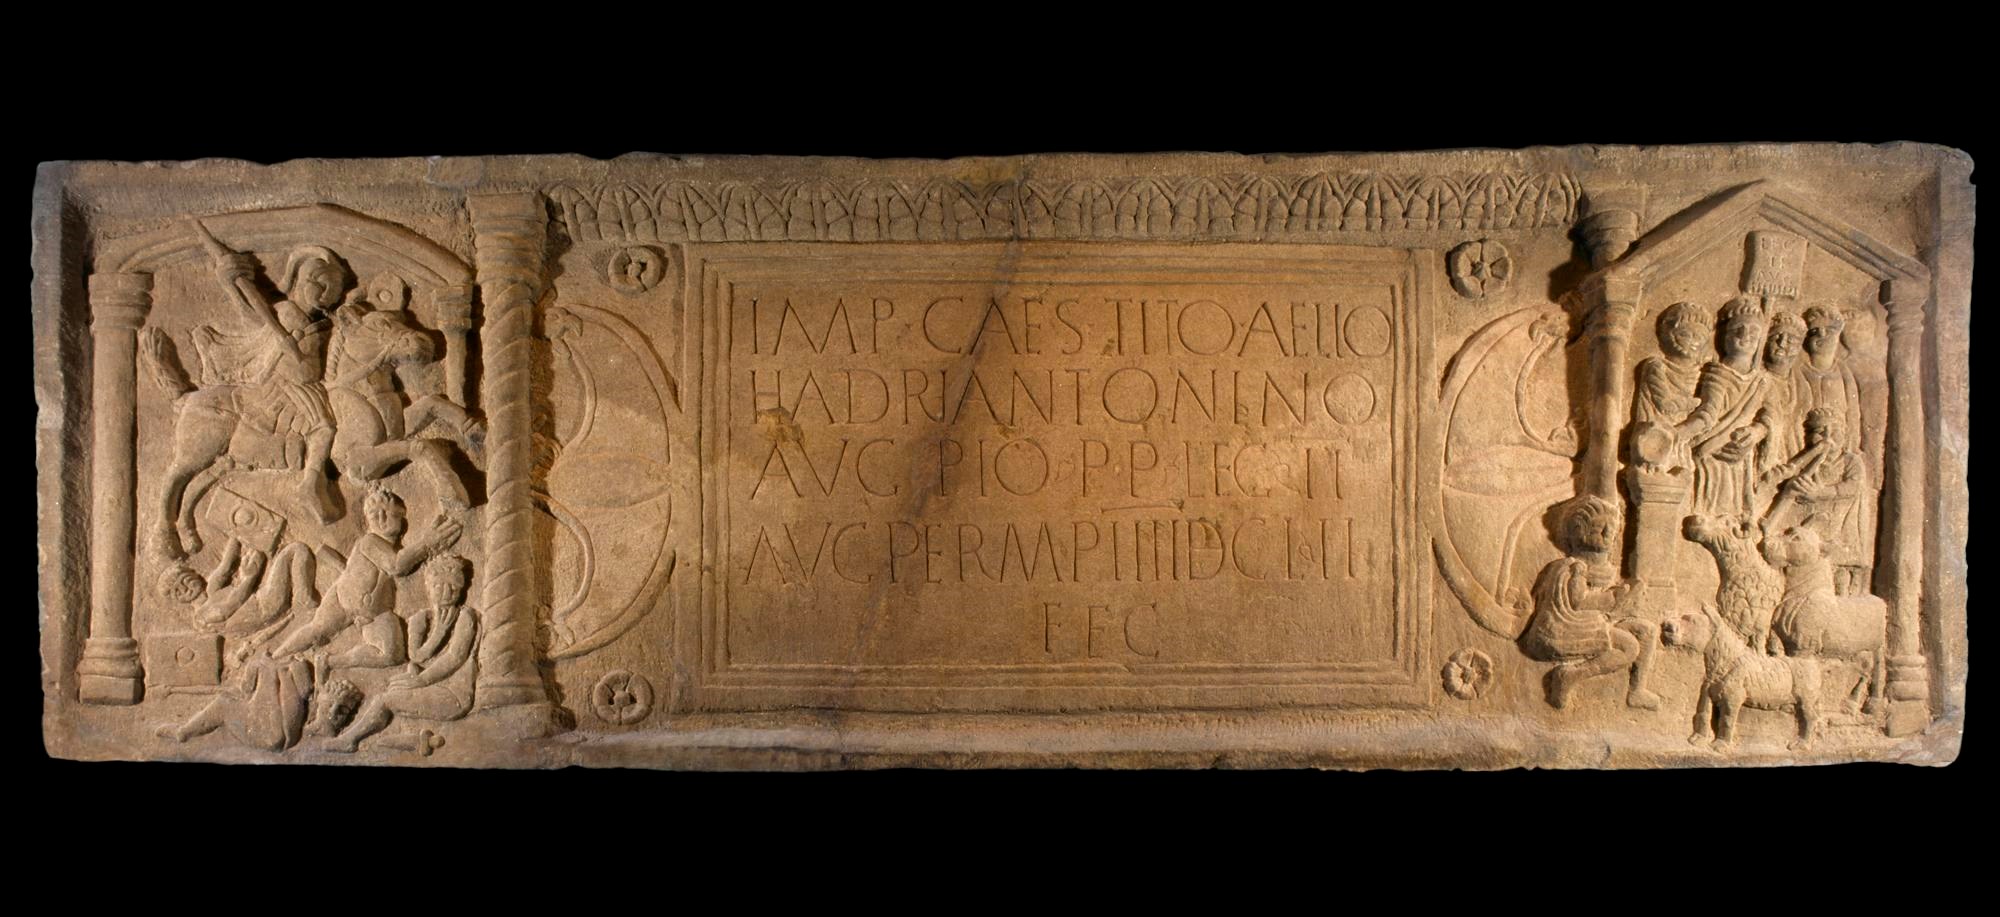 Long, off-yellow stone distance slab with Latin script in the centre and sculptured Roman figures at each end.